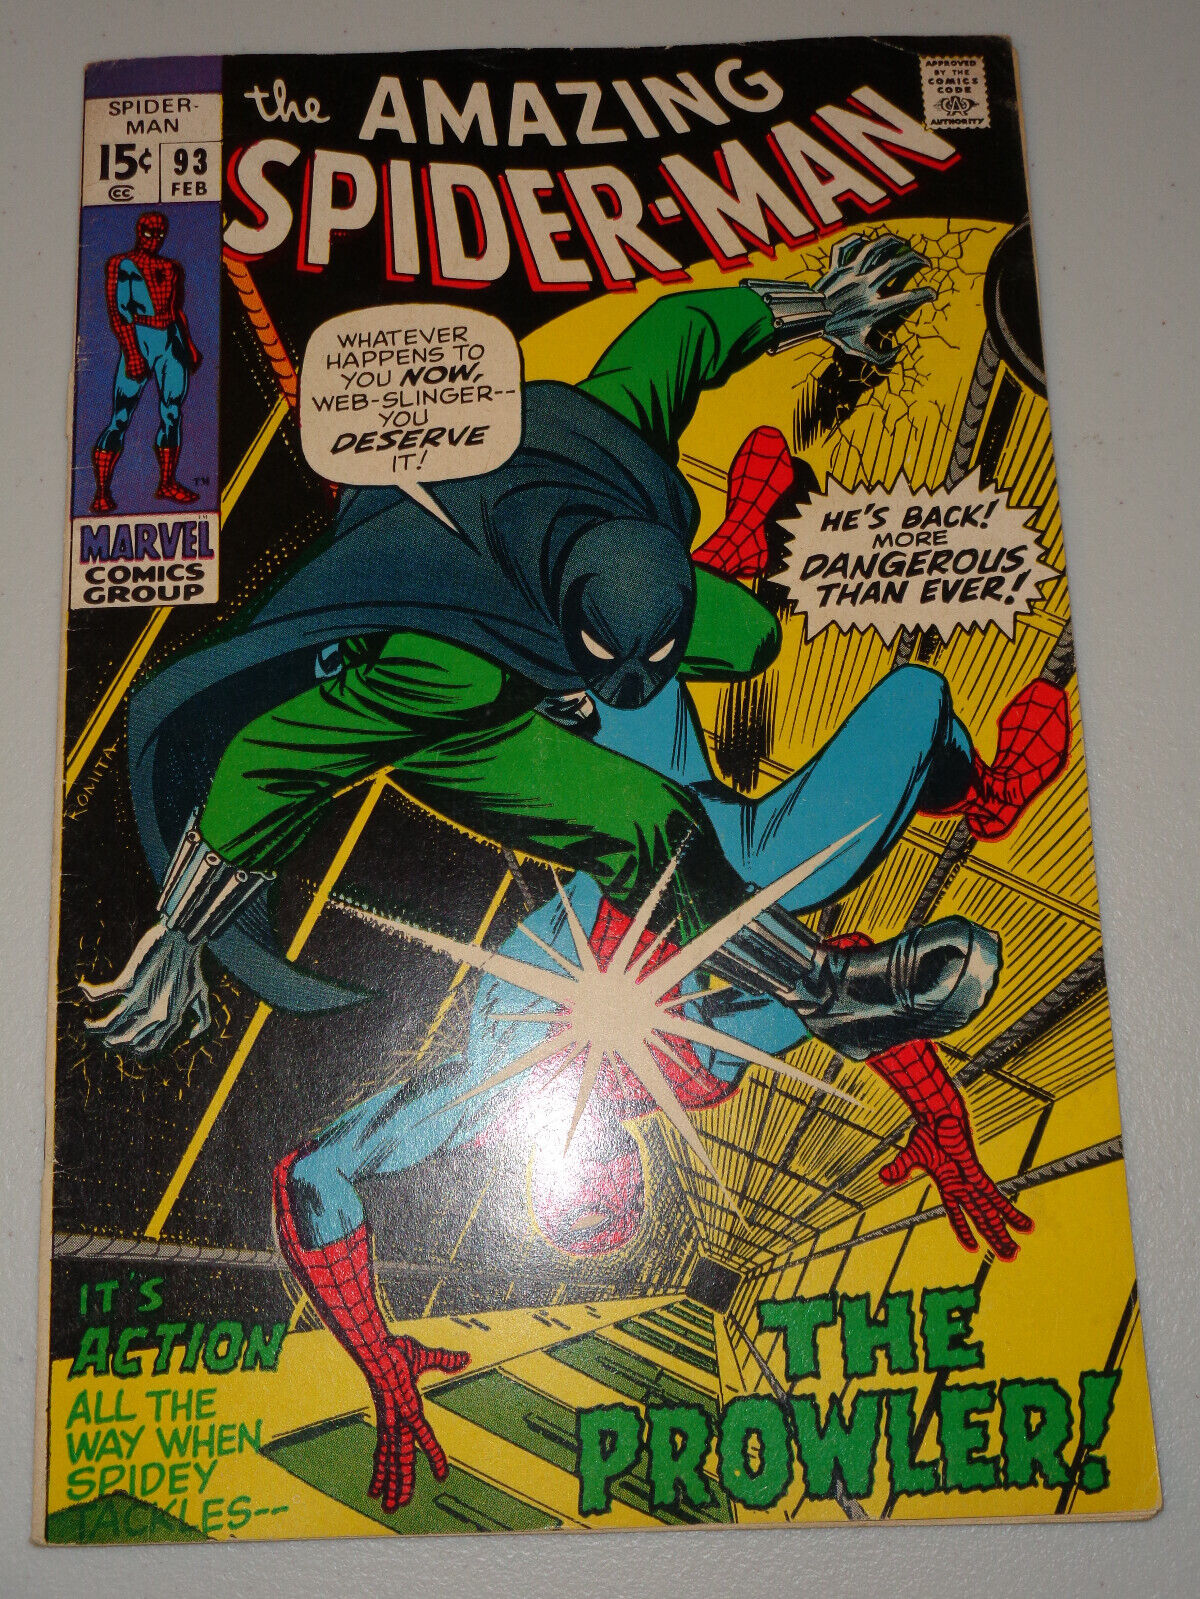 AMAZING SPIDER-MAN #93 (1971 ; Nice FN/VF to VF- Cond...But Has Top Staple Pull)